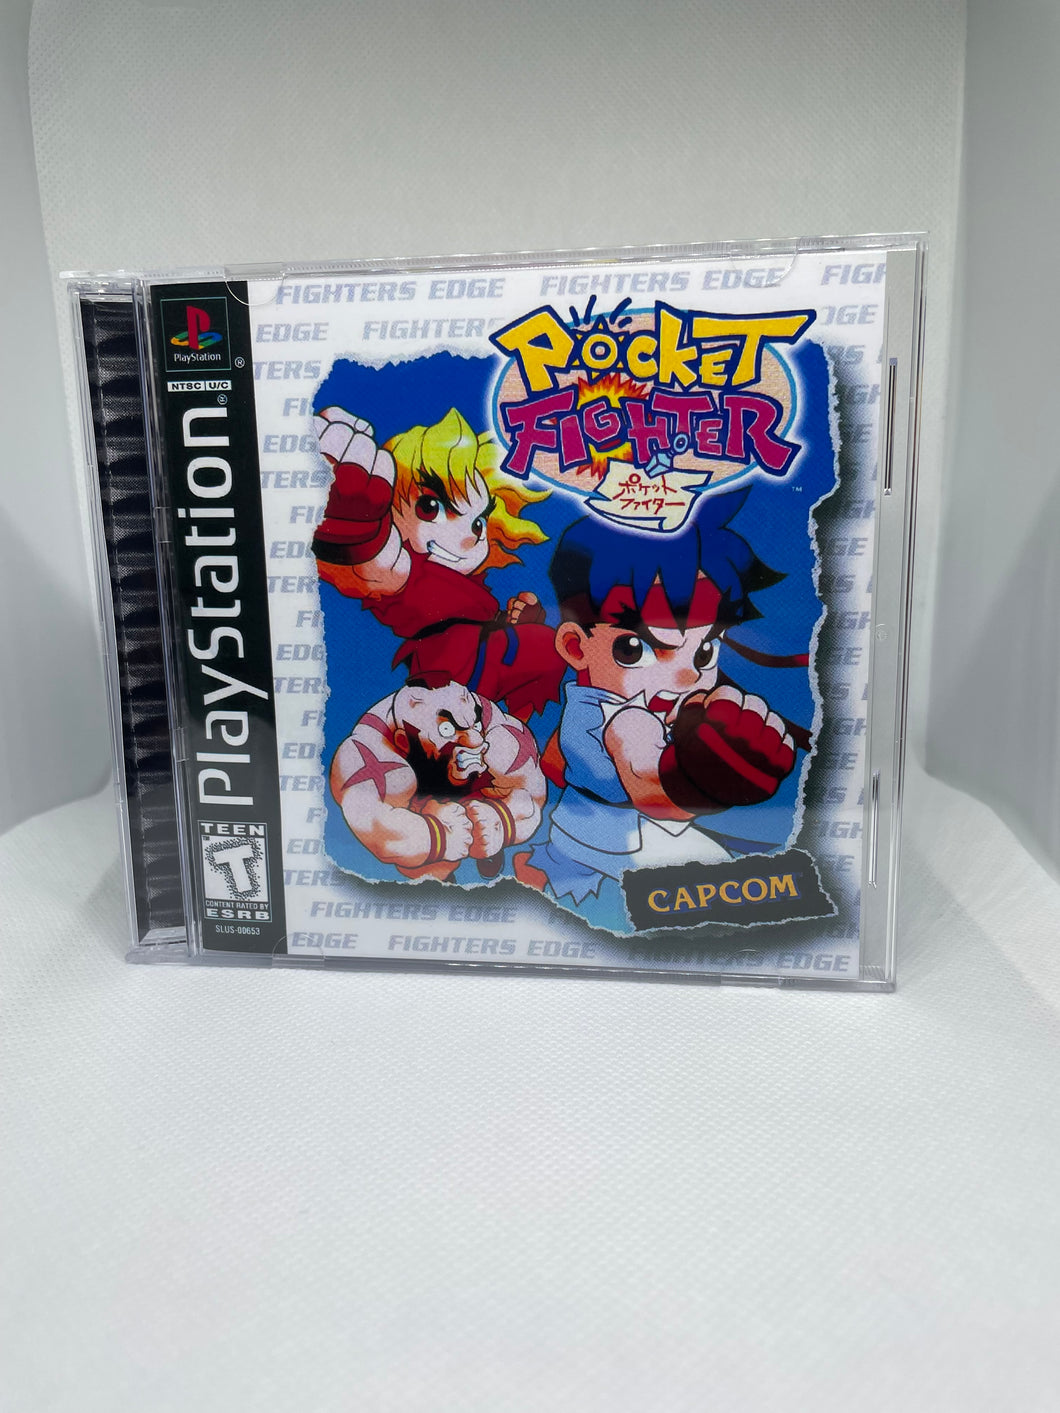 Pocket Fighter PS1 Reproduction Case